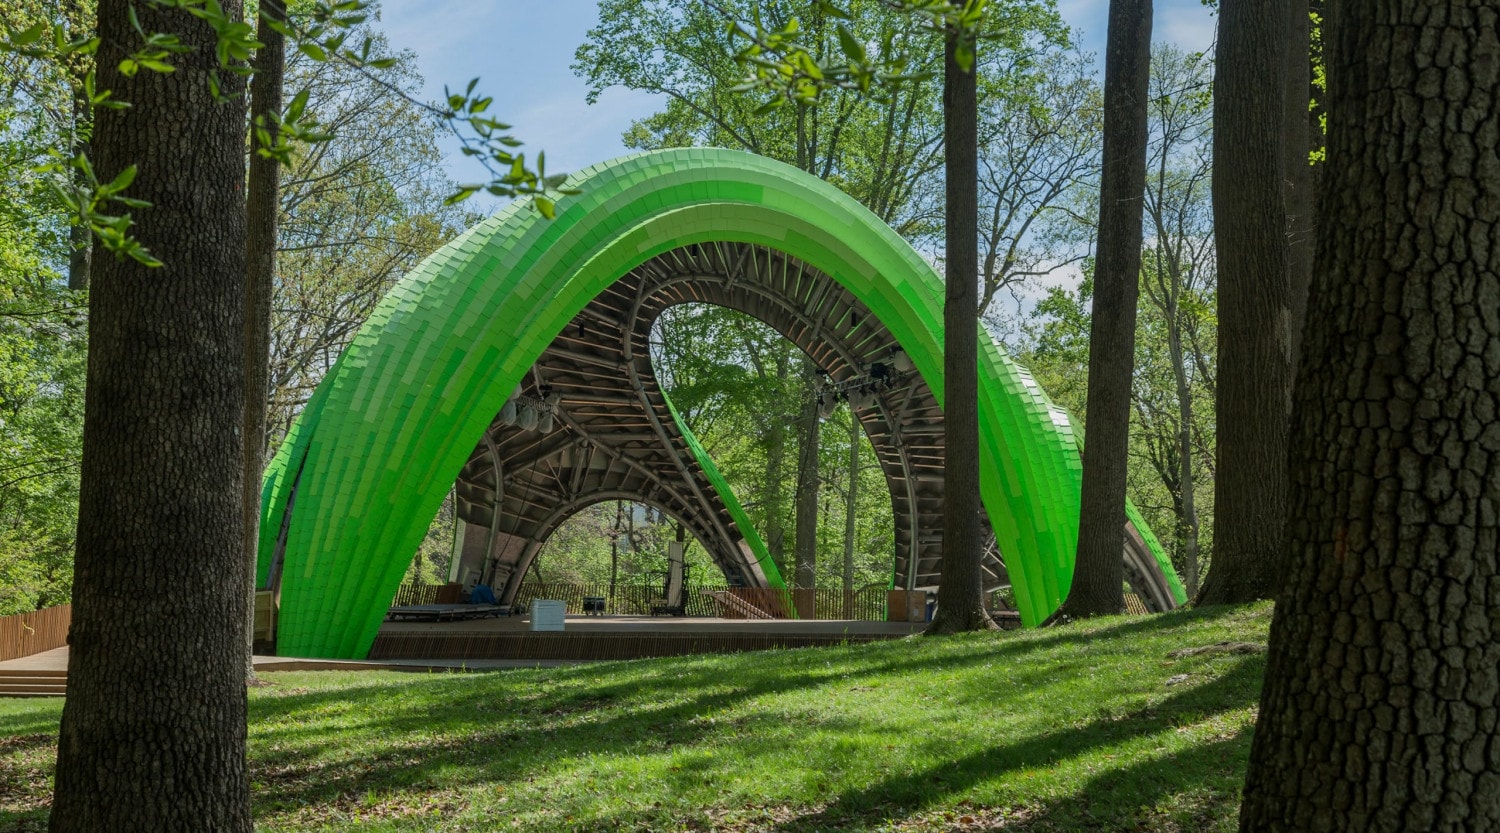 The Chrysalis at Merriweather Park in Symphony Woods.